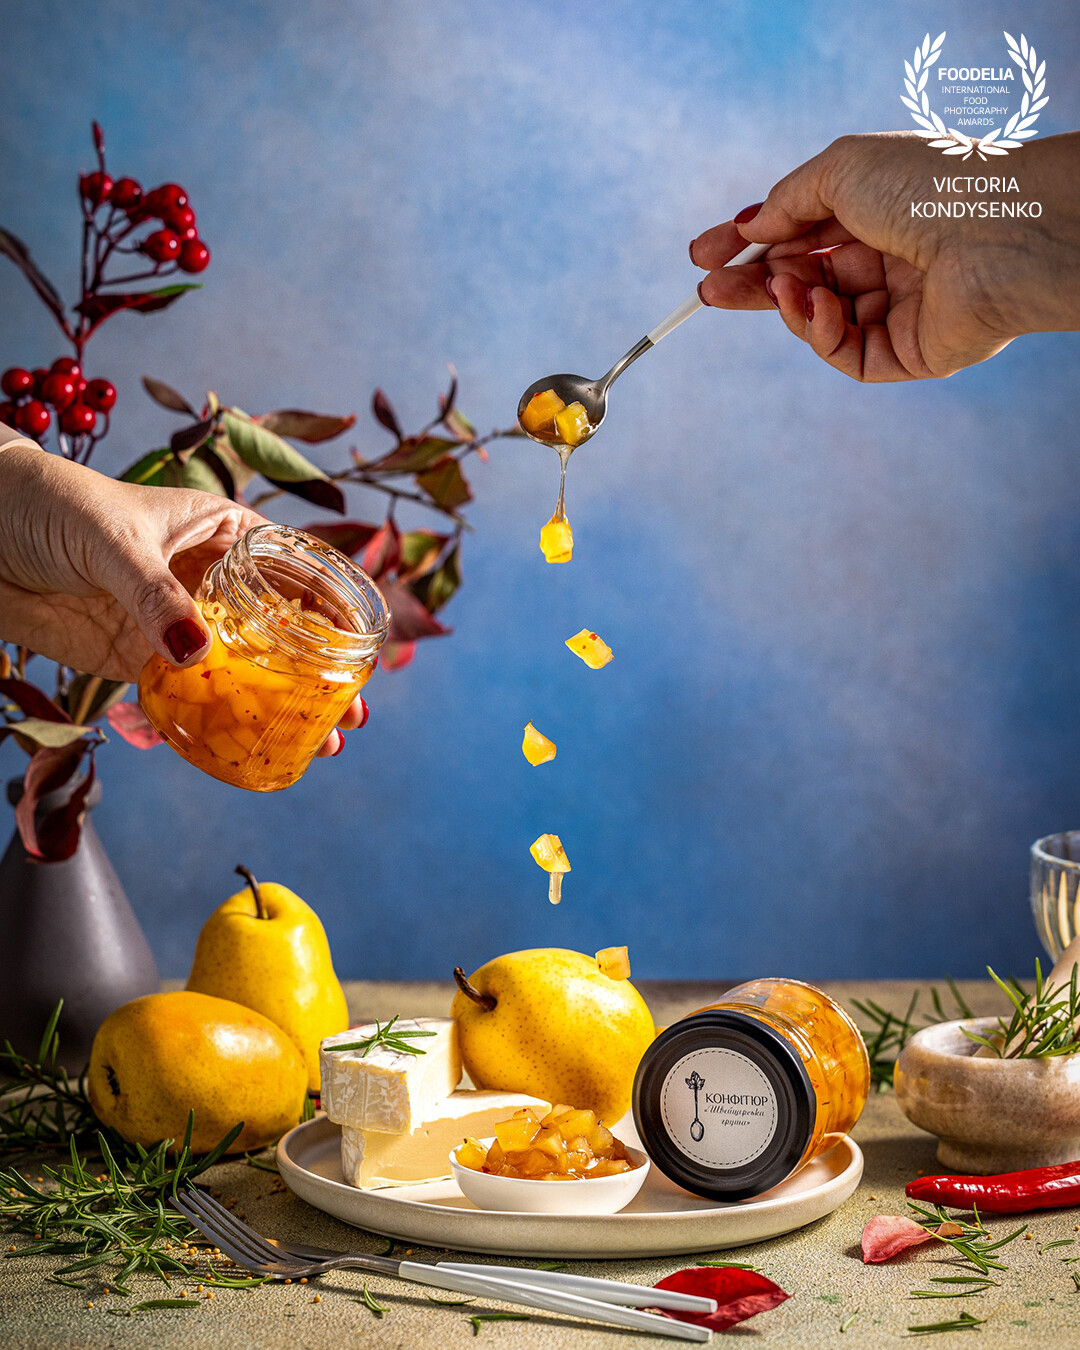 "Swiss pear" jam with chili pepper, vodka, mustard and rosemary. Advertising photo shoot of the local Ukrainian garden family farming.